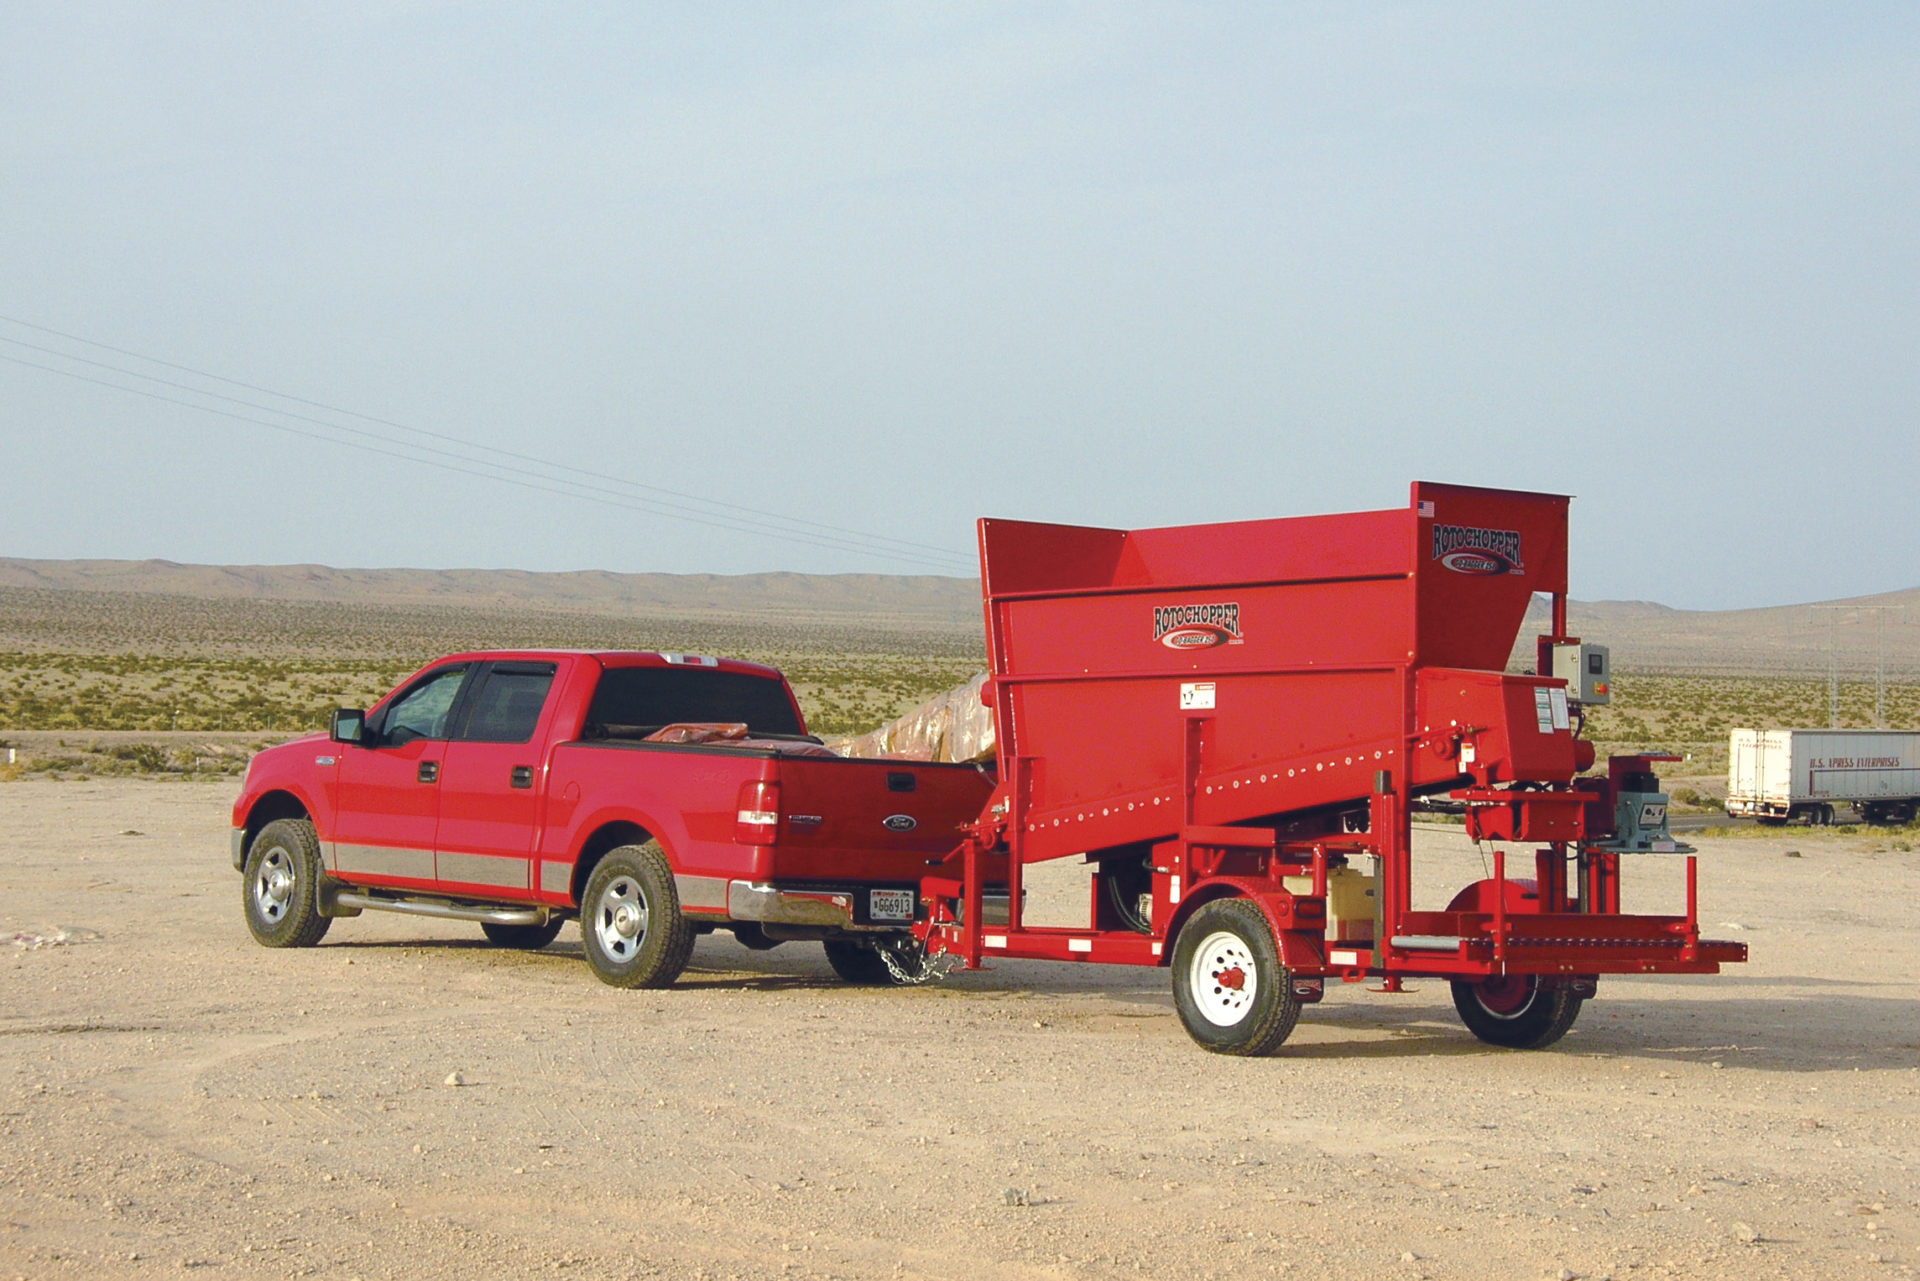 gb250 mobile bagger hooked up to half ton truck